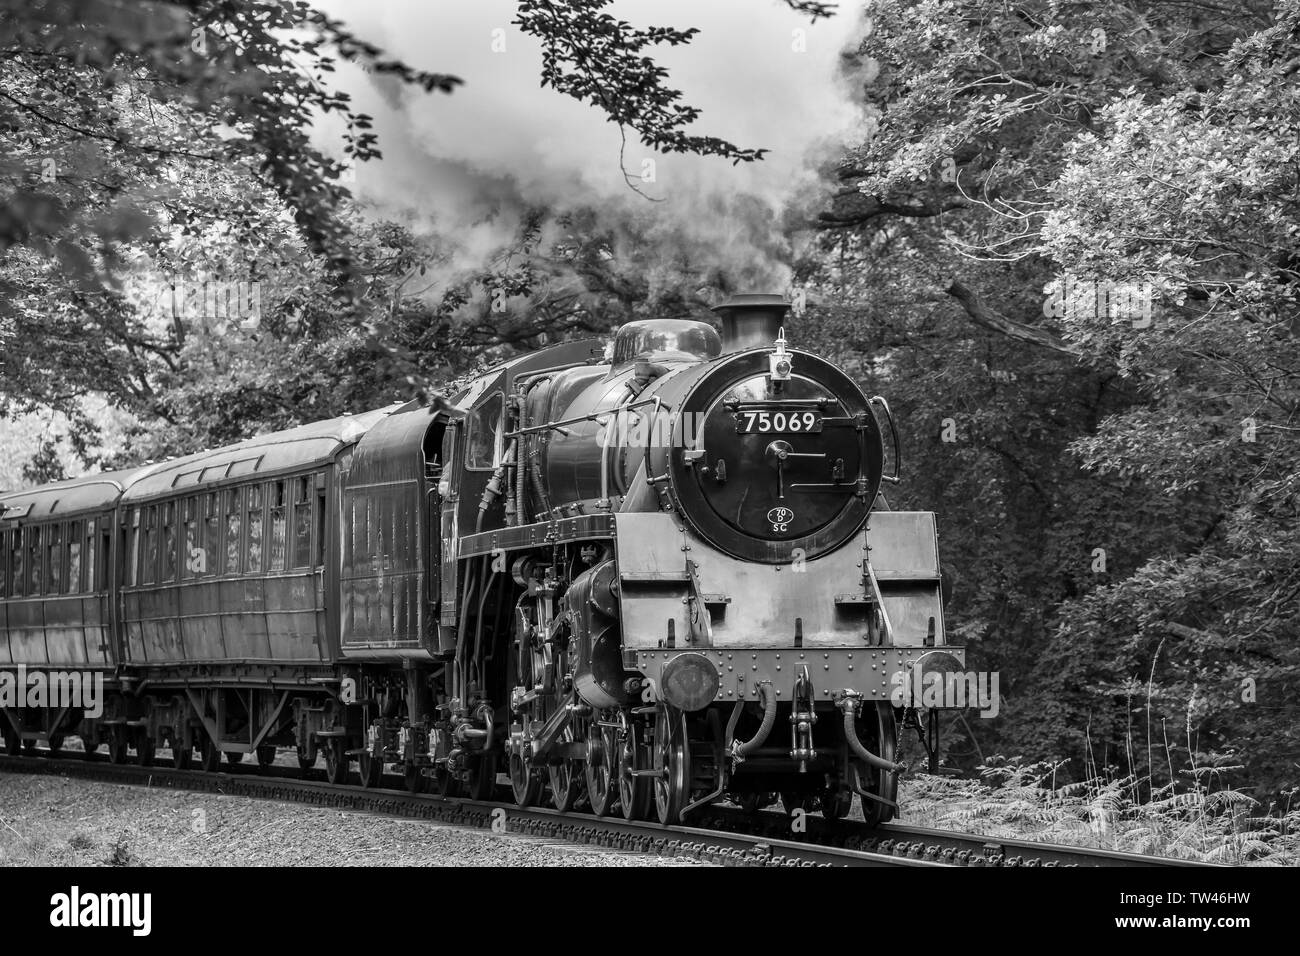 Black & white close up of vintage UK steam train front approaching, passing through rural summer countryside on heritage railway line. UK locomotives. Stock Photo